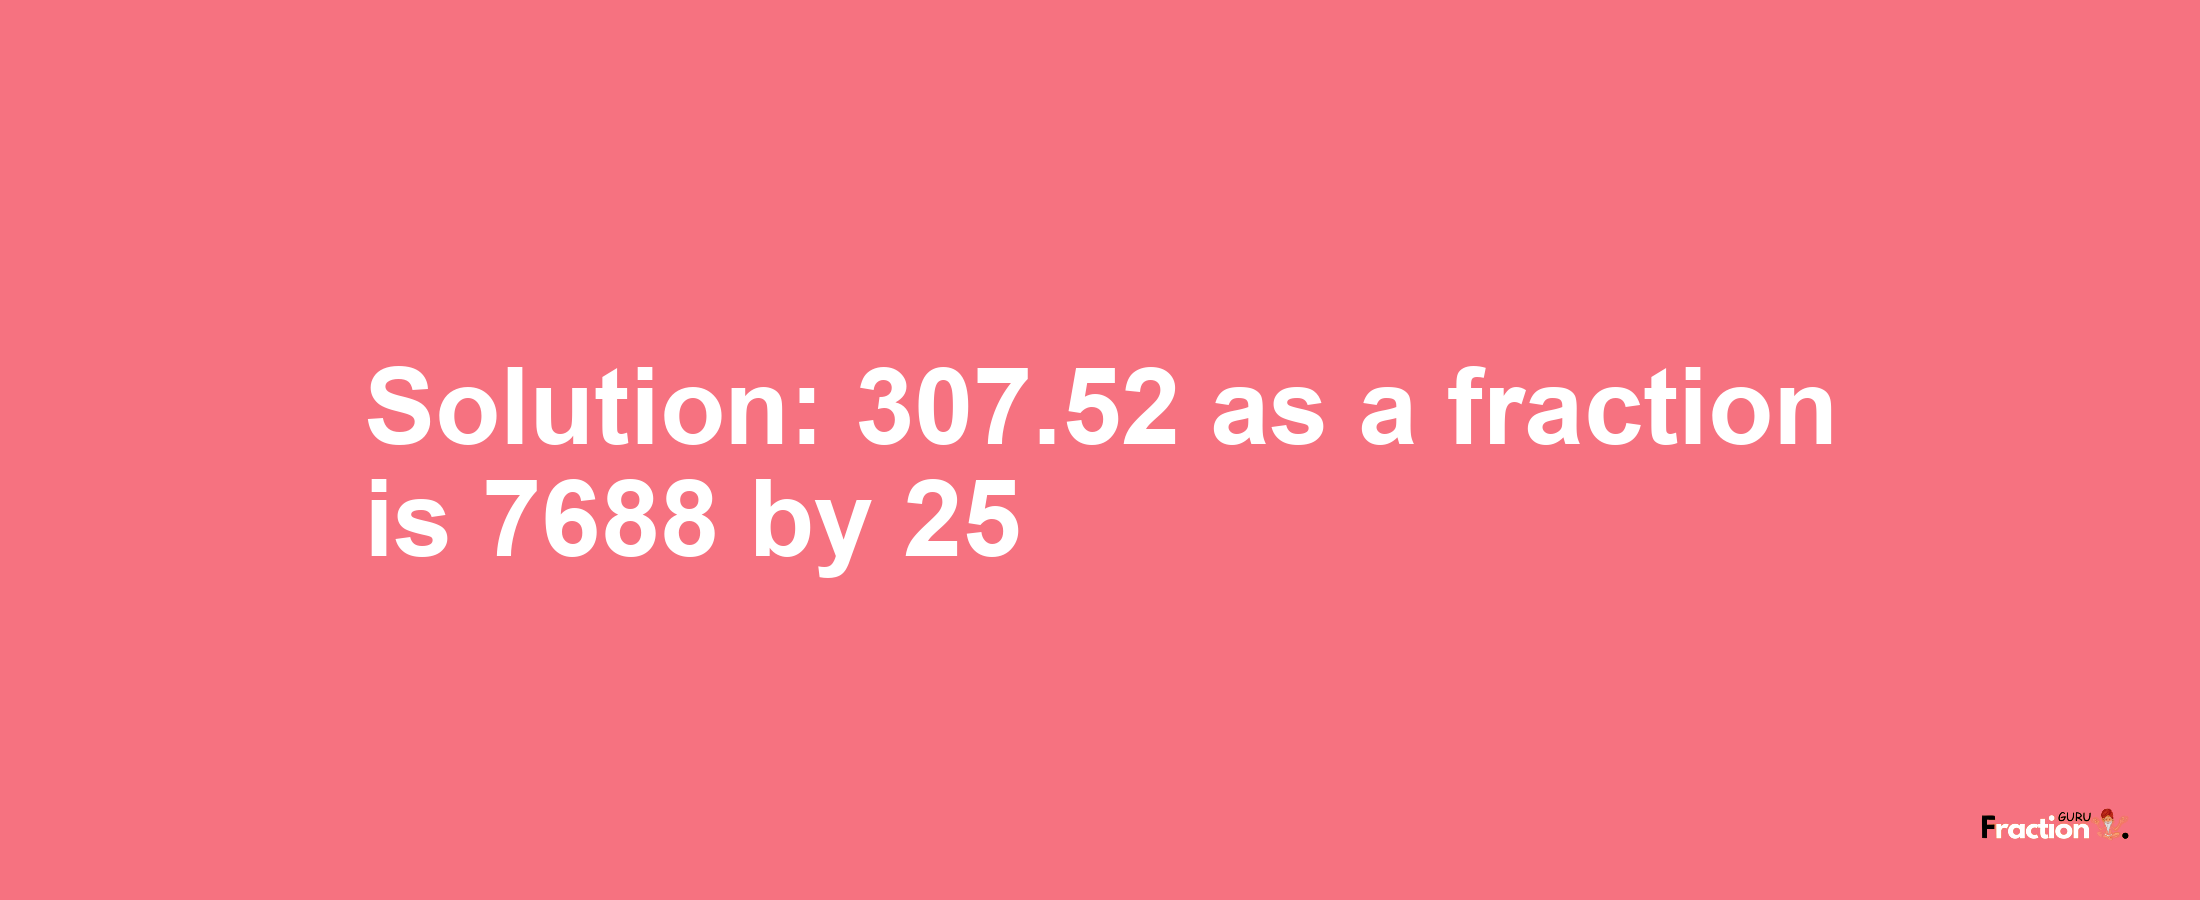 Solution:307.52 as a fraction is 7688/25